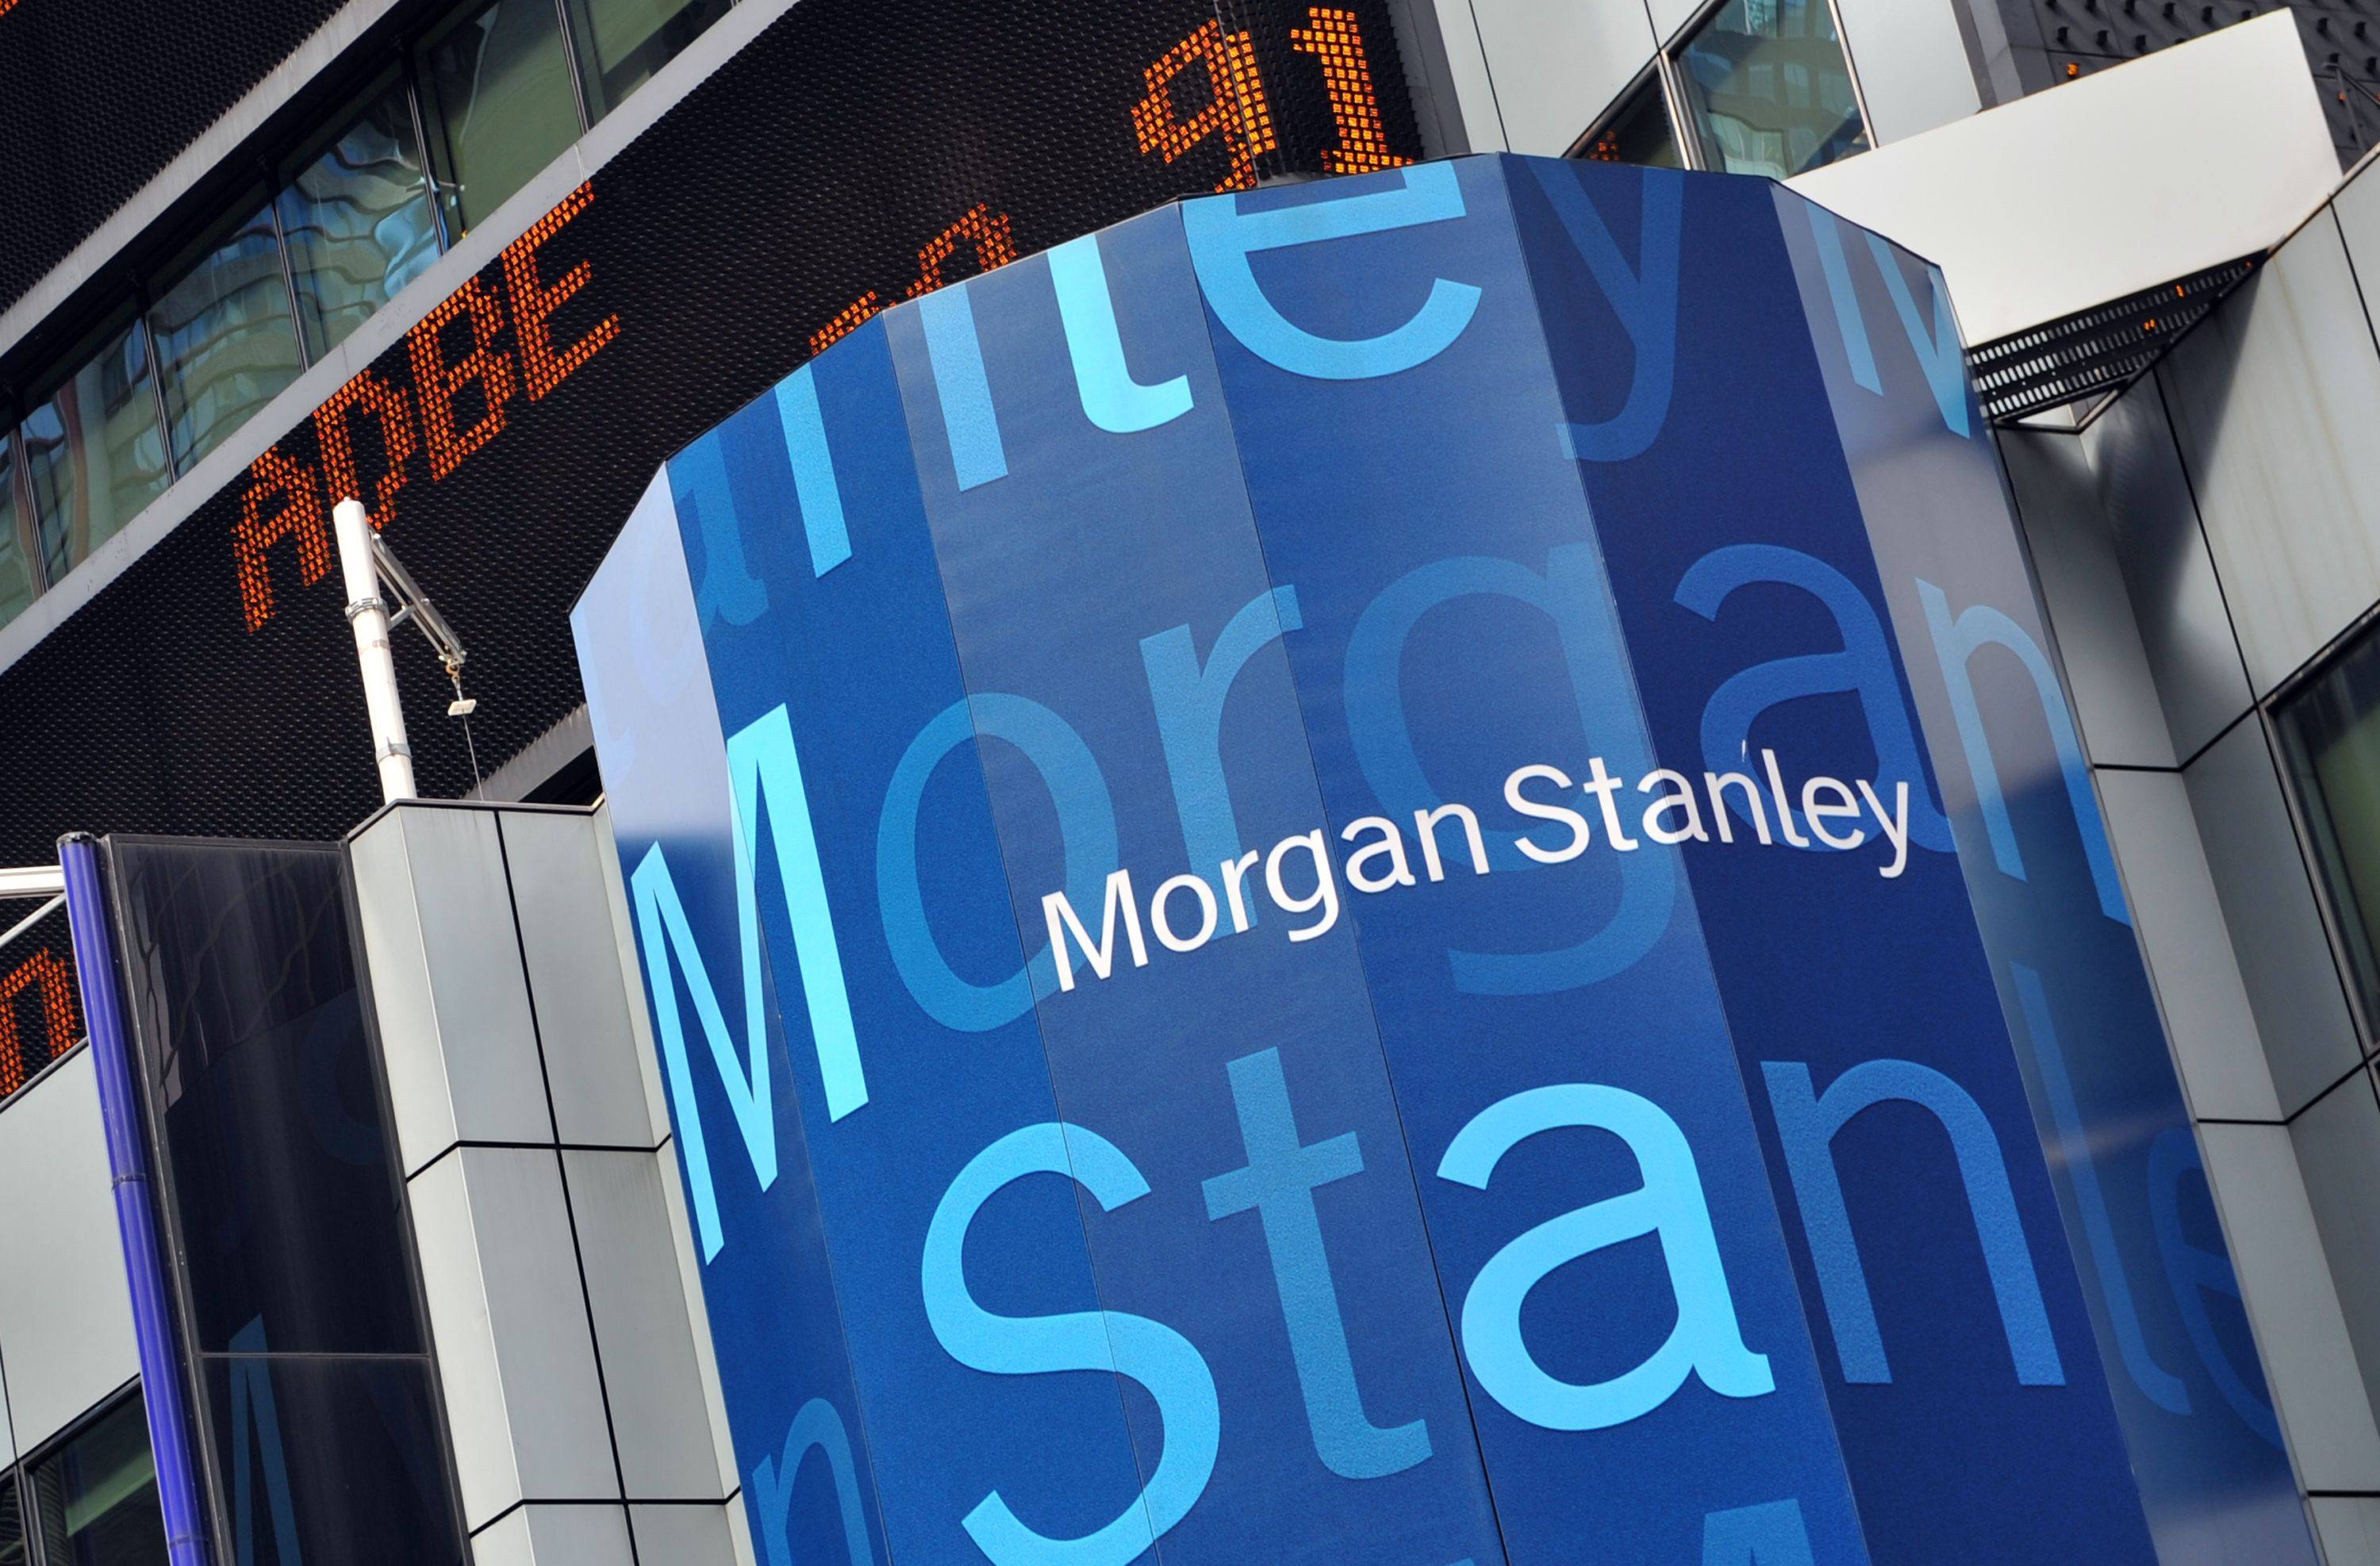 Morgan Stanley is one of a string of global asset managers including JPMorgan, Fidelity, Manulife and Neuberger Berman that have applied to set up fully-owned mutual fund units in China after regulators scrapped foreign ownership restrictions in the industry in April 2020. Photo: AFP